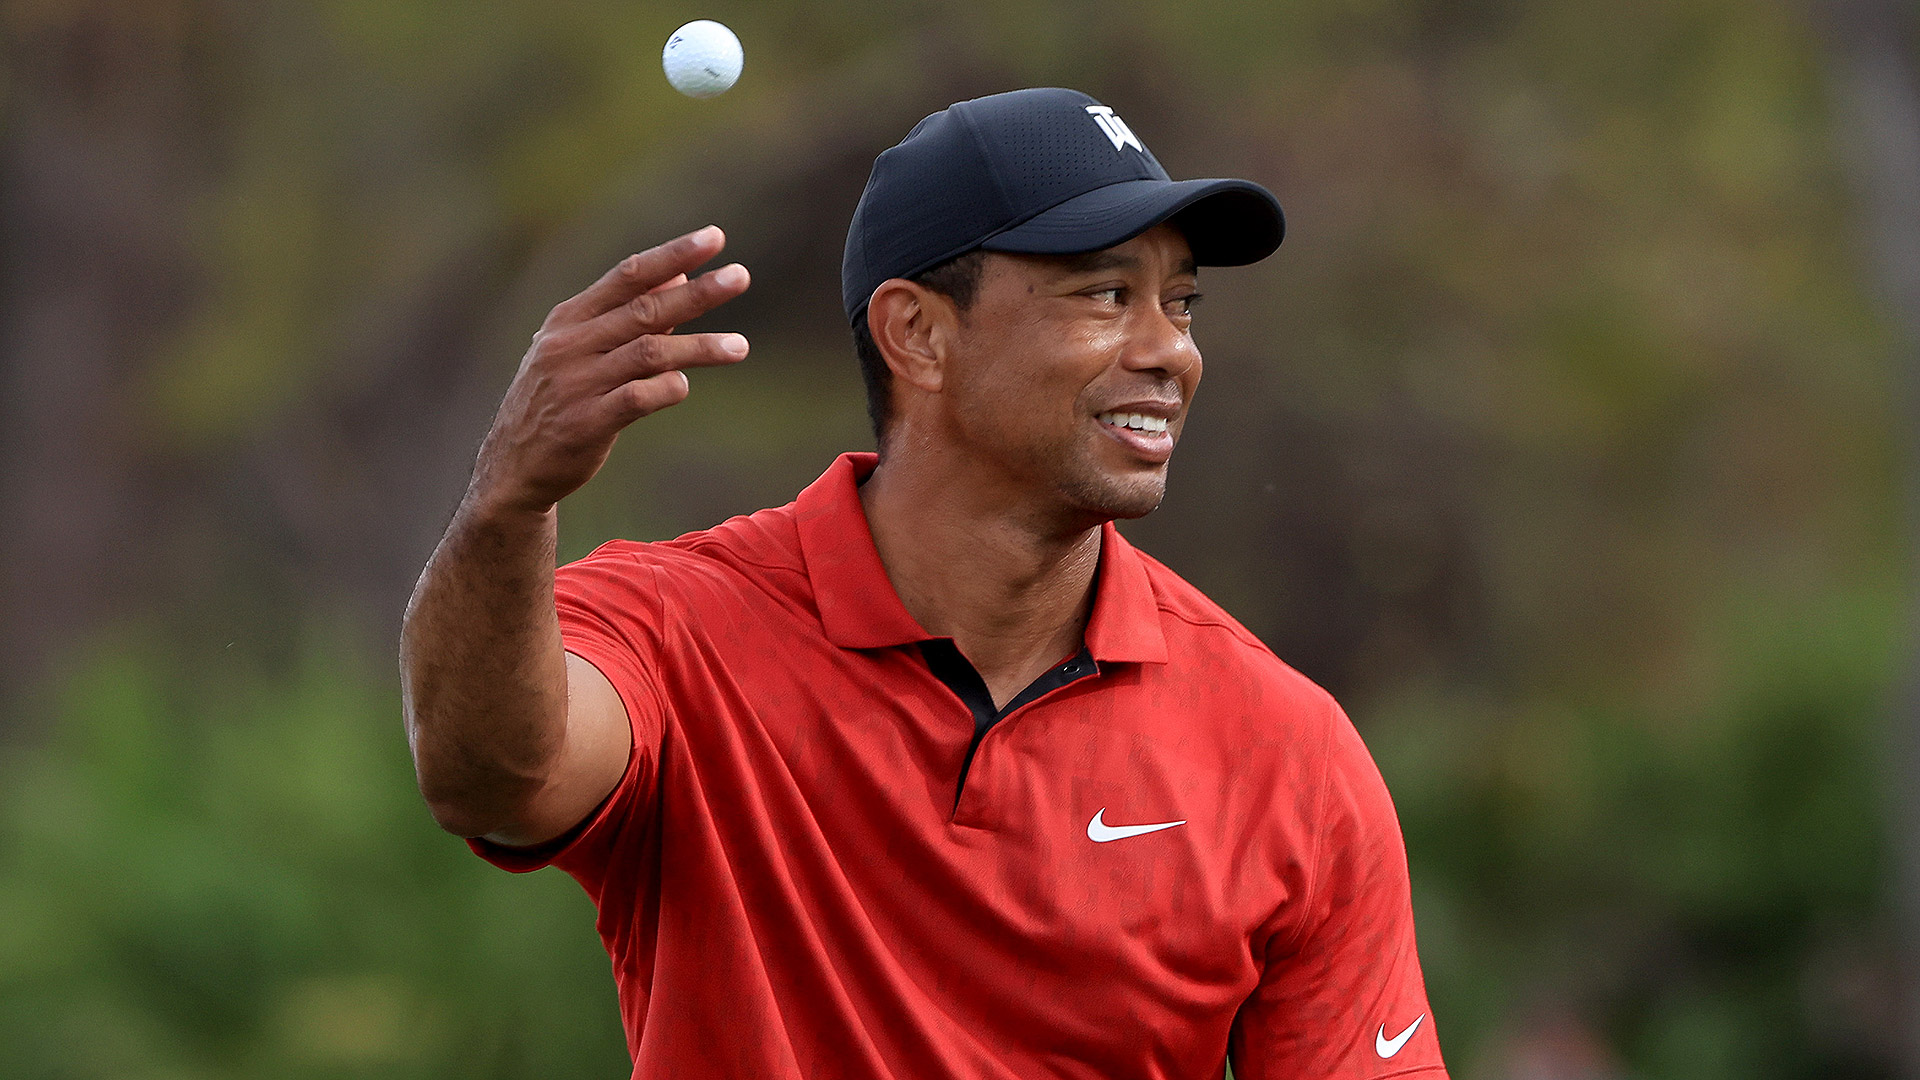 Golf Central Podcast: Behind the scenes of Tiger Woods’ incredible return